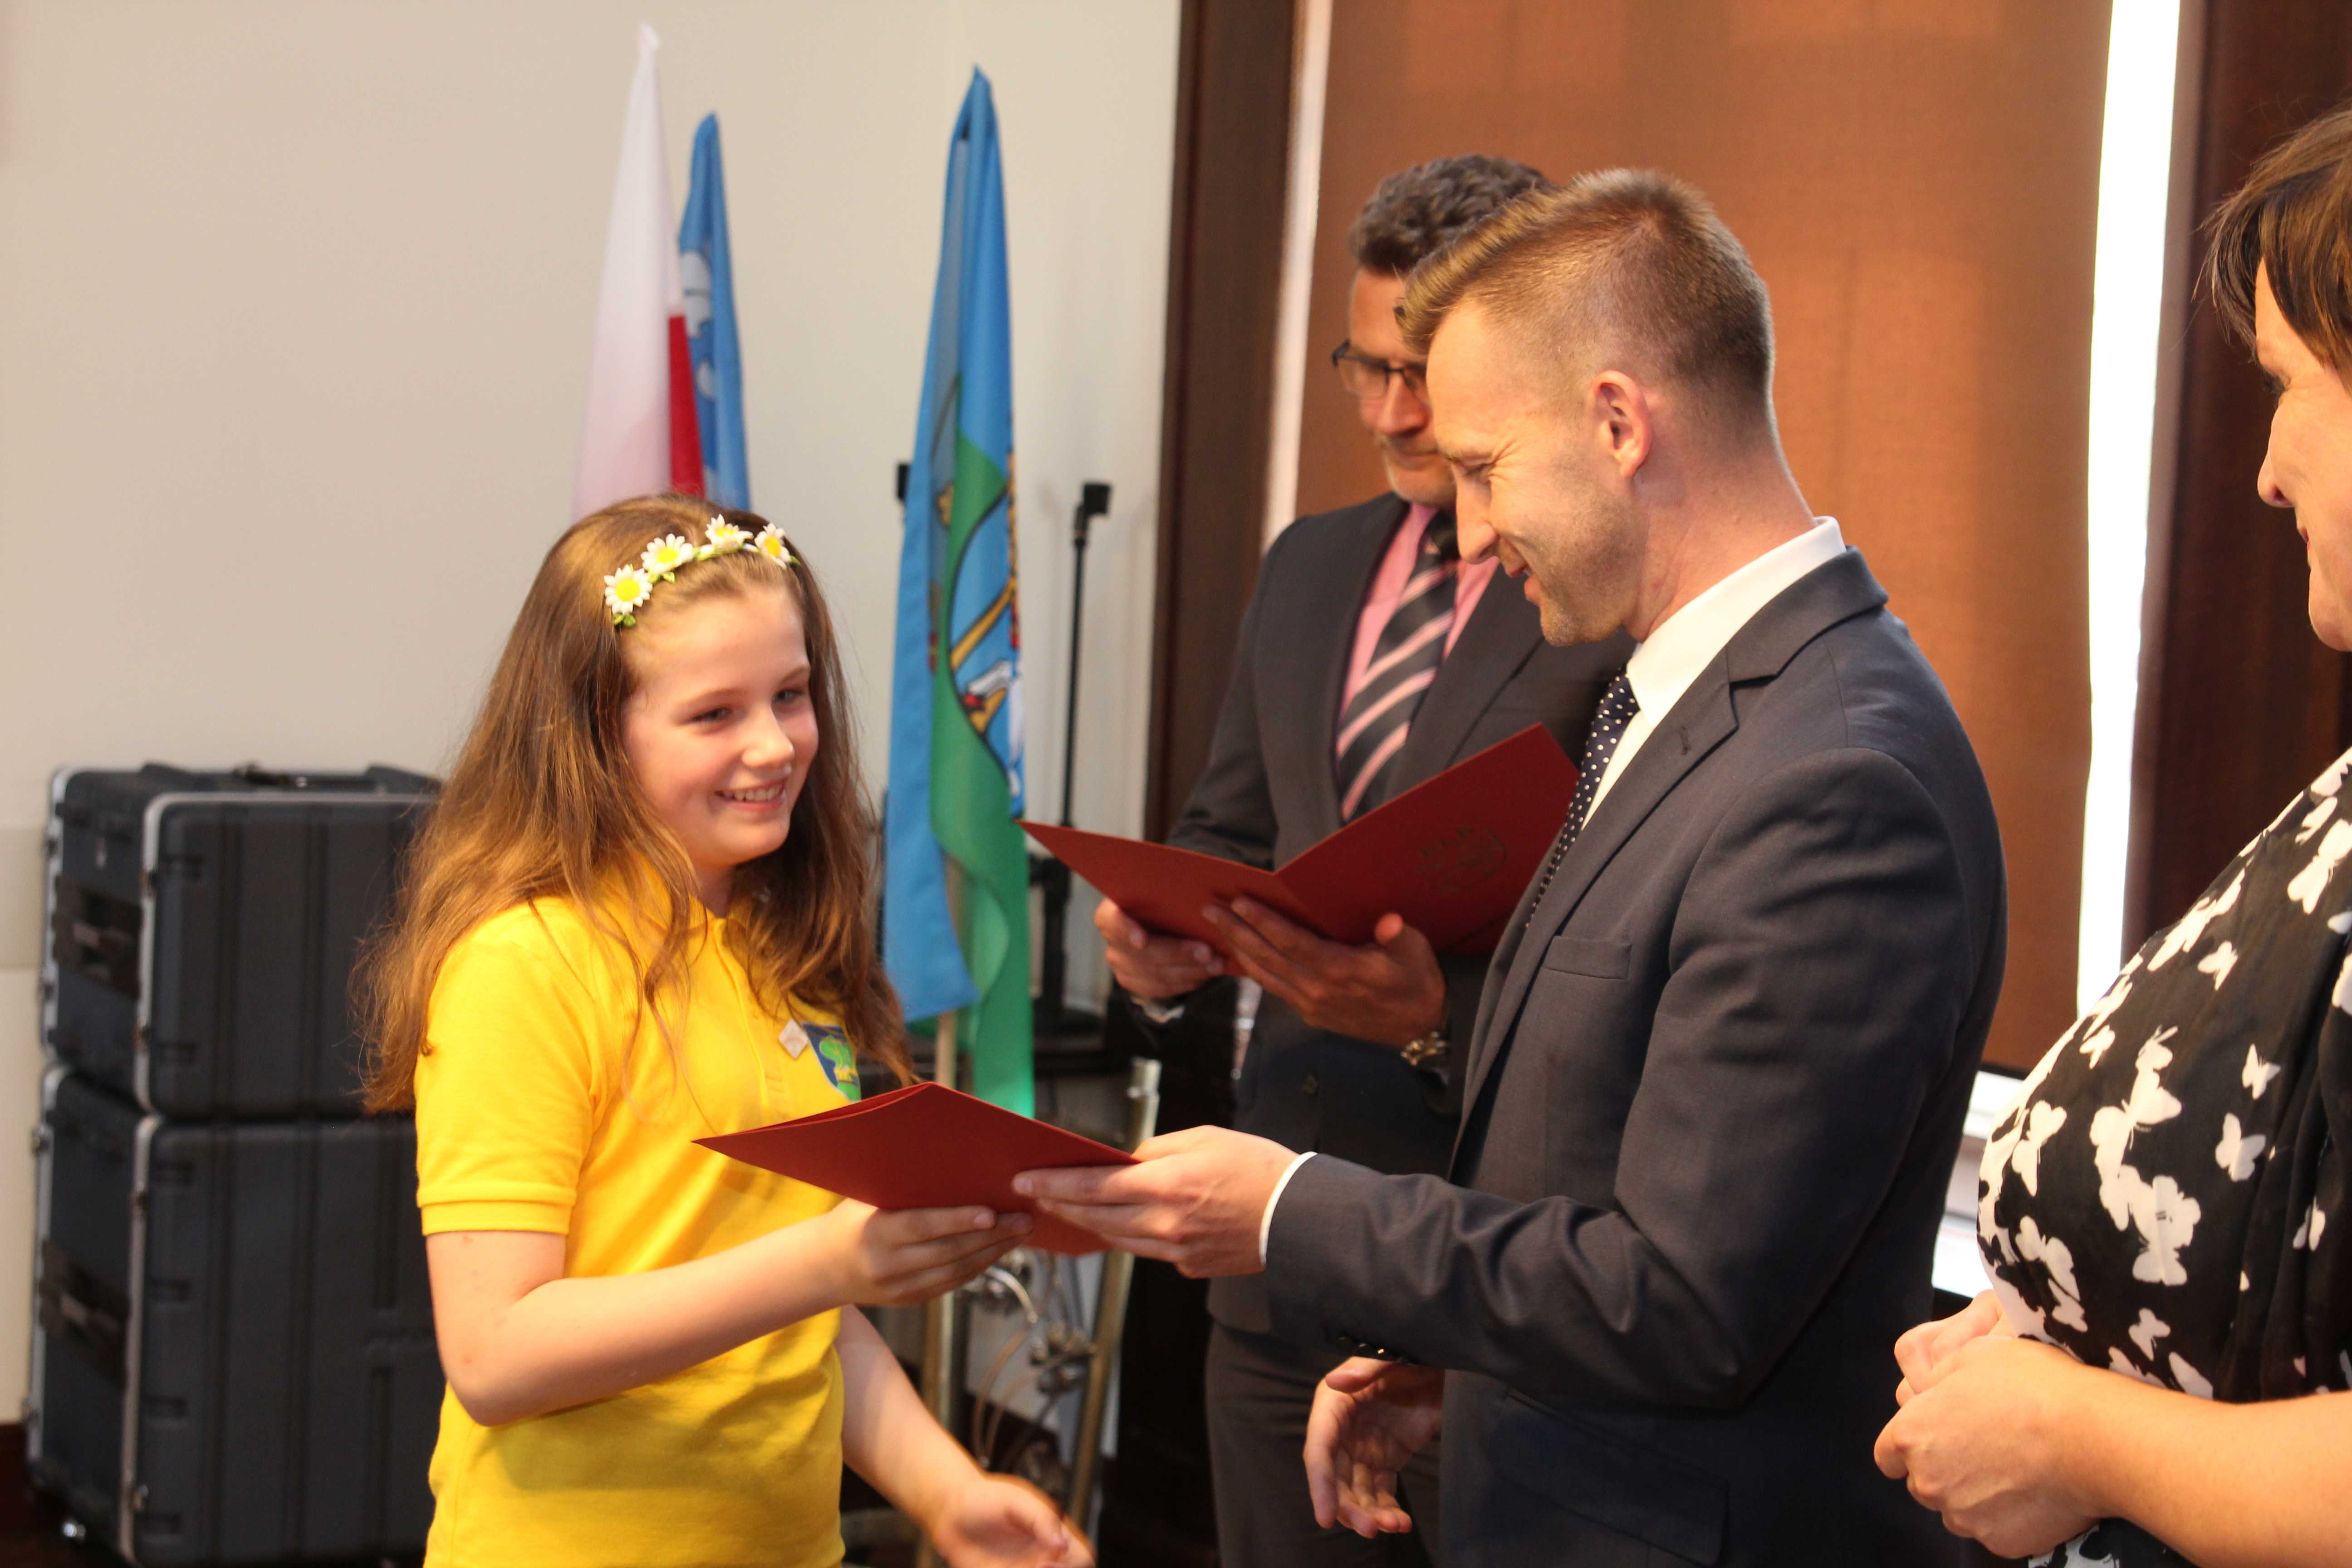 The best students have received scholarships for academic performance and social activities